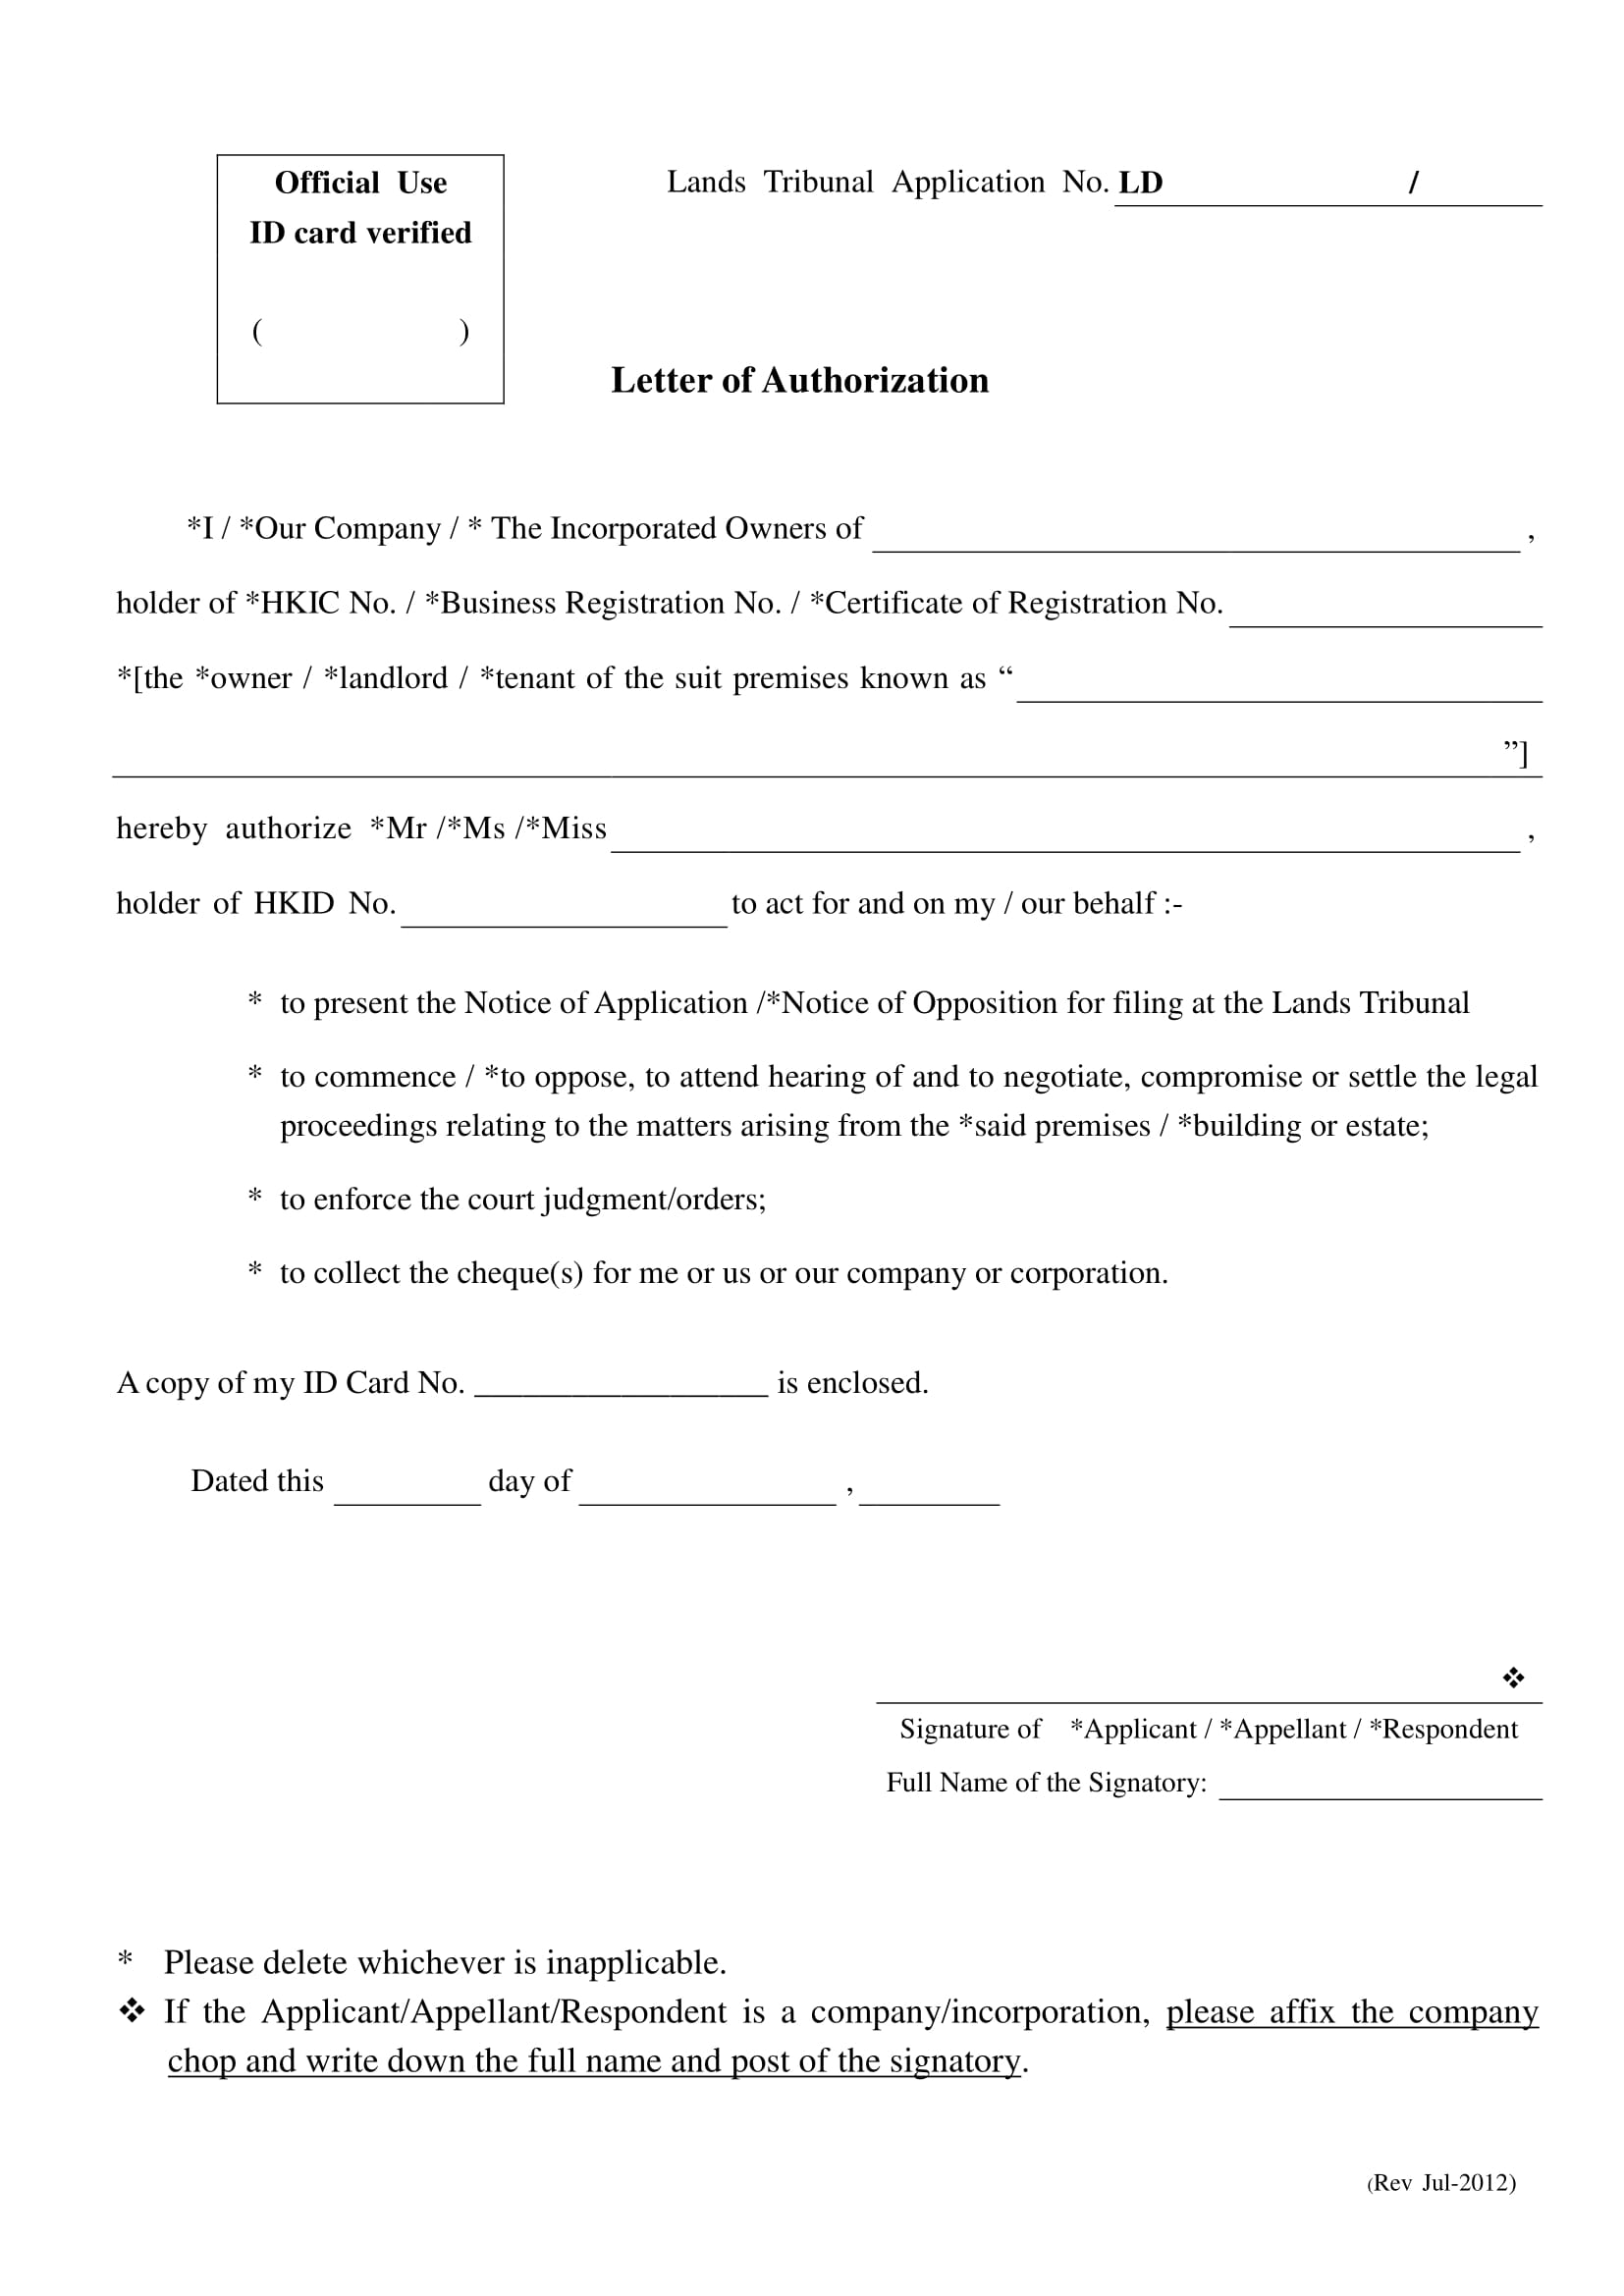 Authorization Letter Sample To Act On Behalf Of Someone | HQ Printable Documents